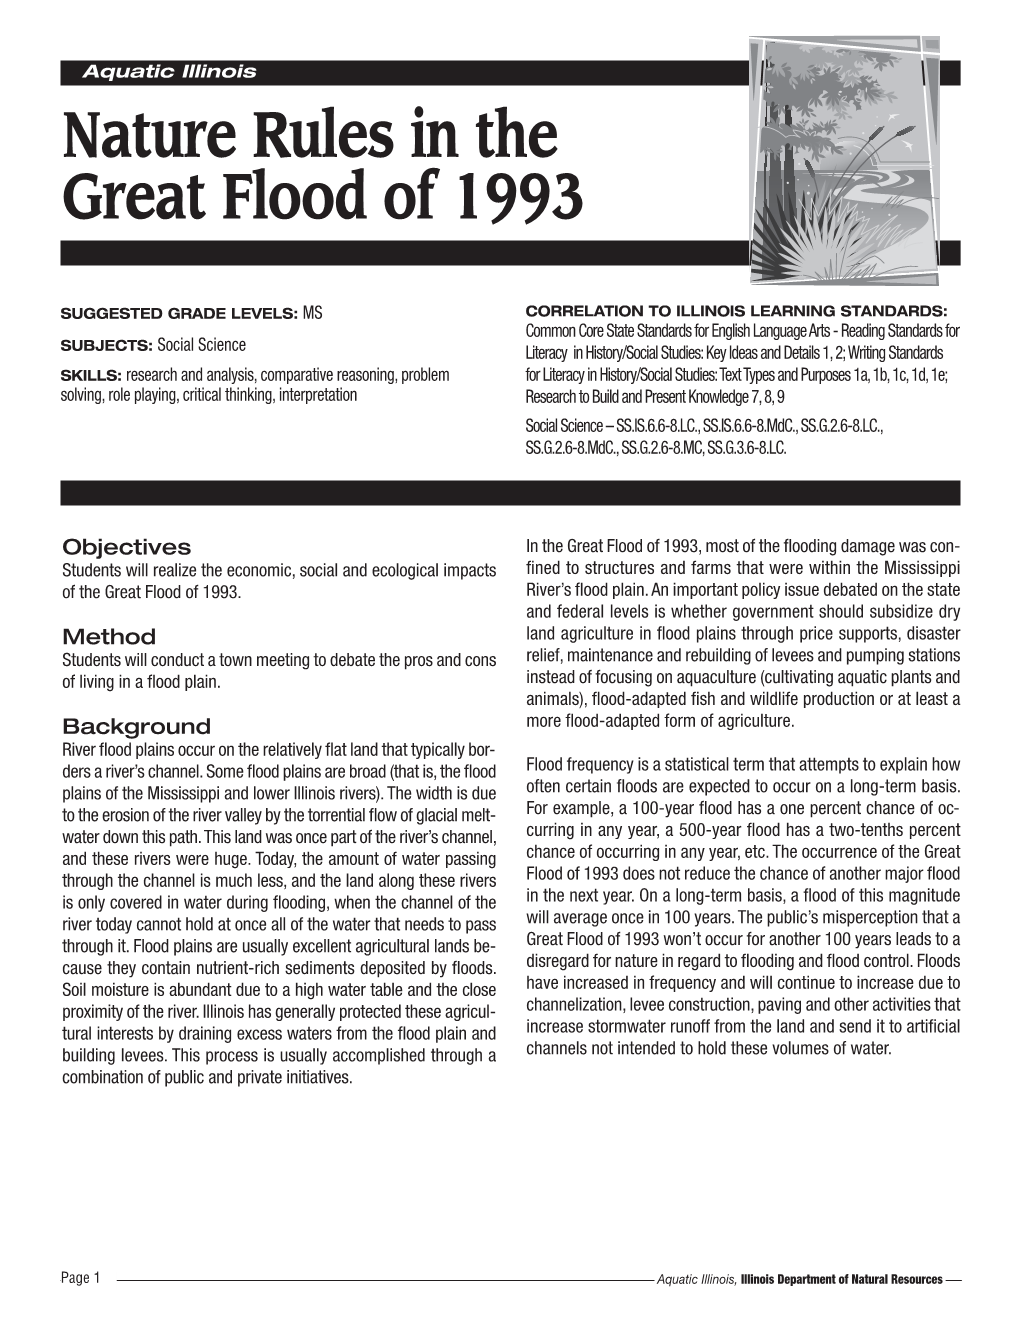 Nature Rules in the Great Flood of 1993